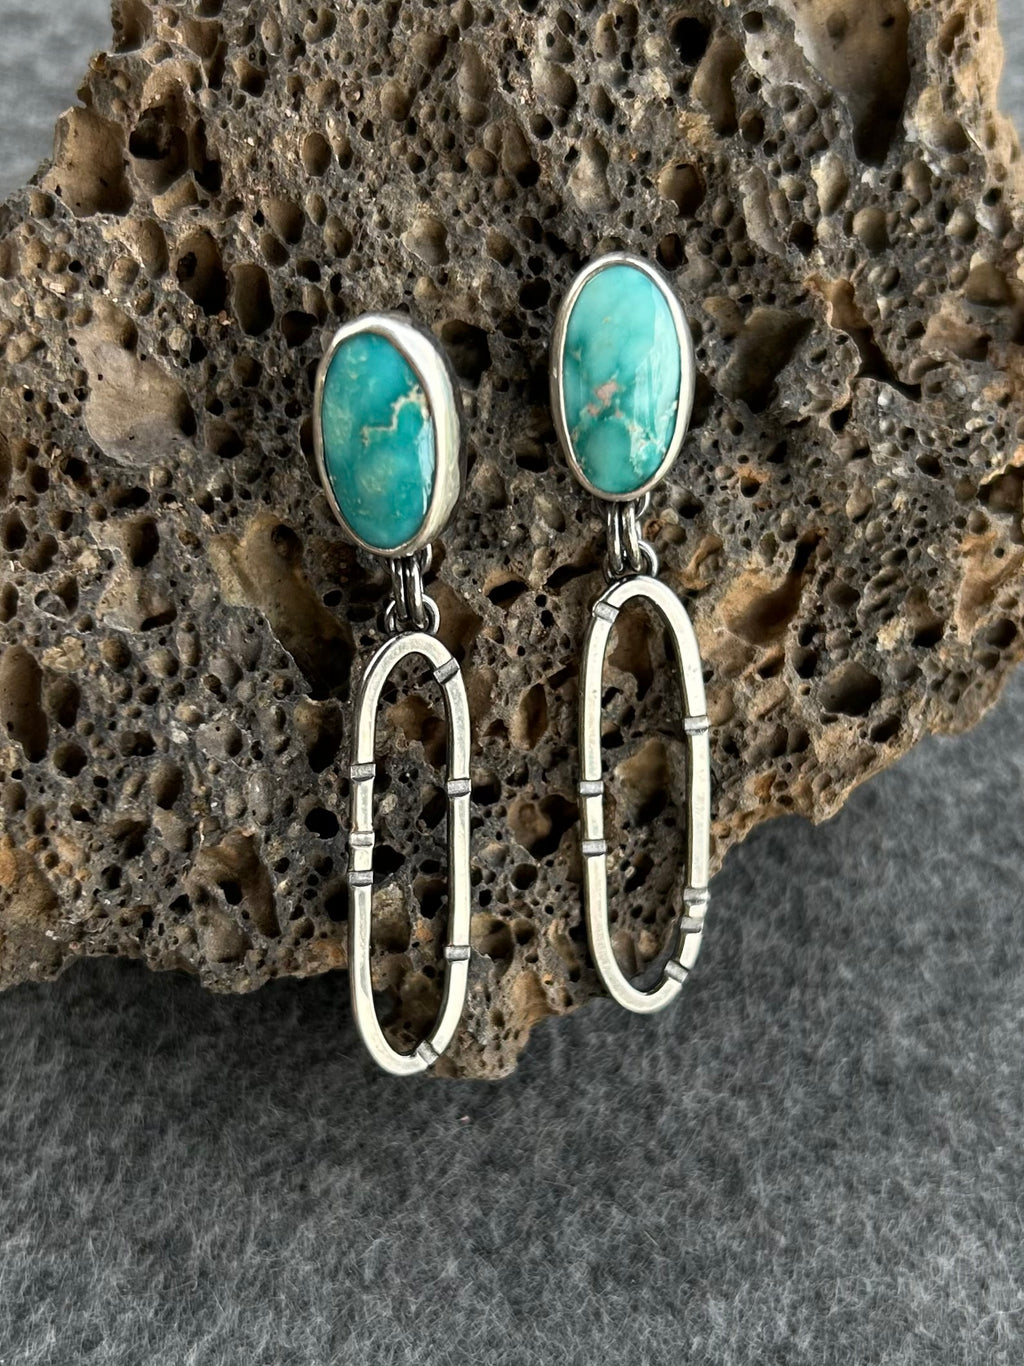 Anvil Hoop Earrings with Stamped Sterling Silver and Whitewater Turquoise